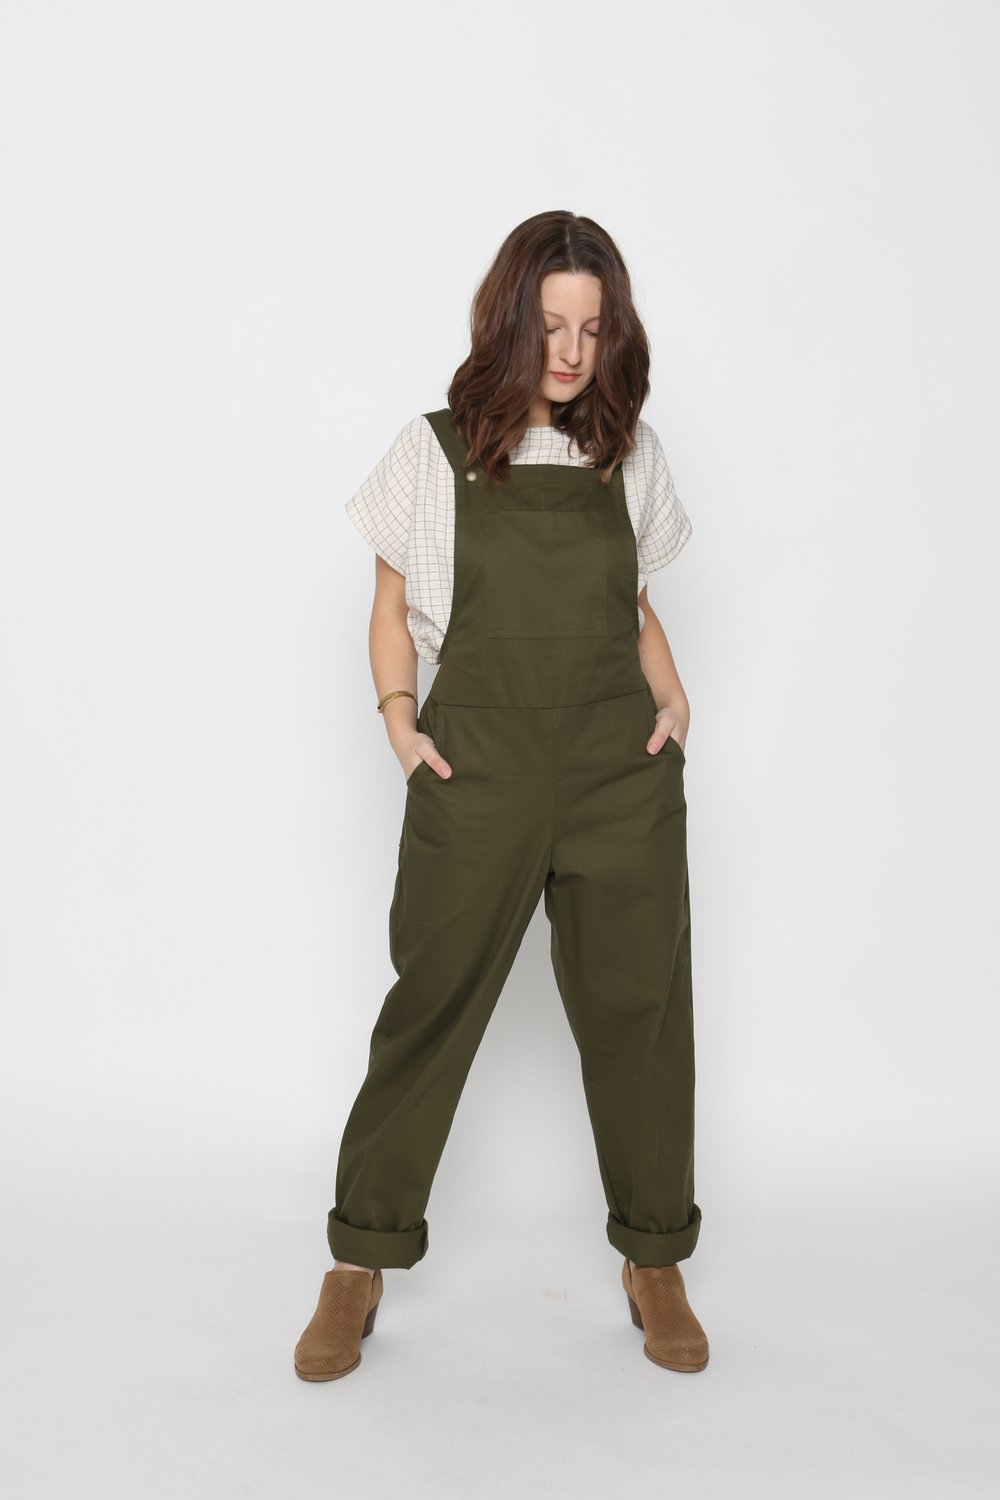 Market Overalls — CLOTHING